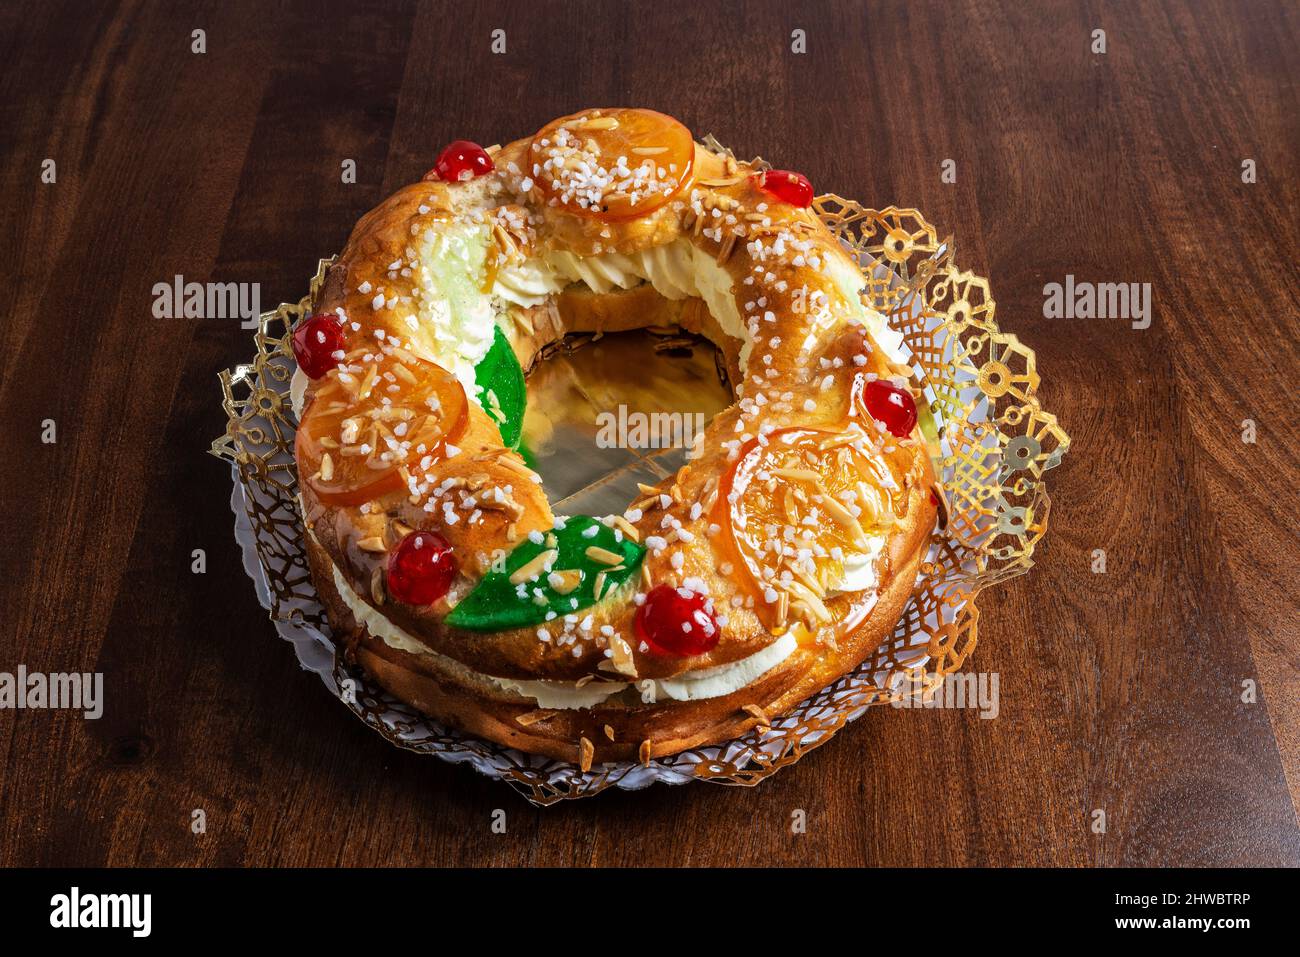 Tortell de reis or king cake is a typical cake of Catalan and Occitan cuisine in the form of a ring or hoop, made of brioche dough, puff pastry and fi Stock Photo